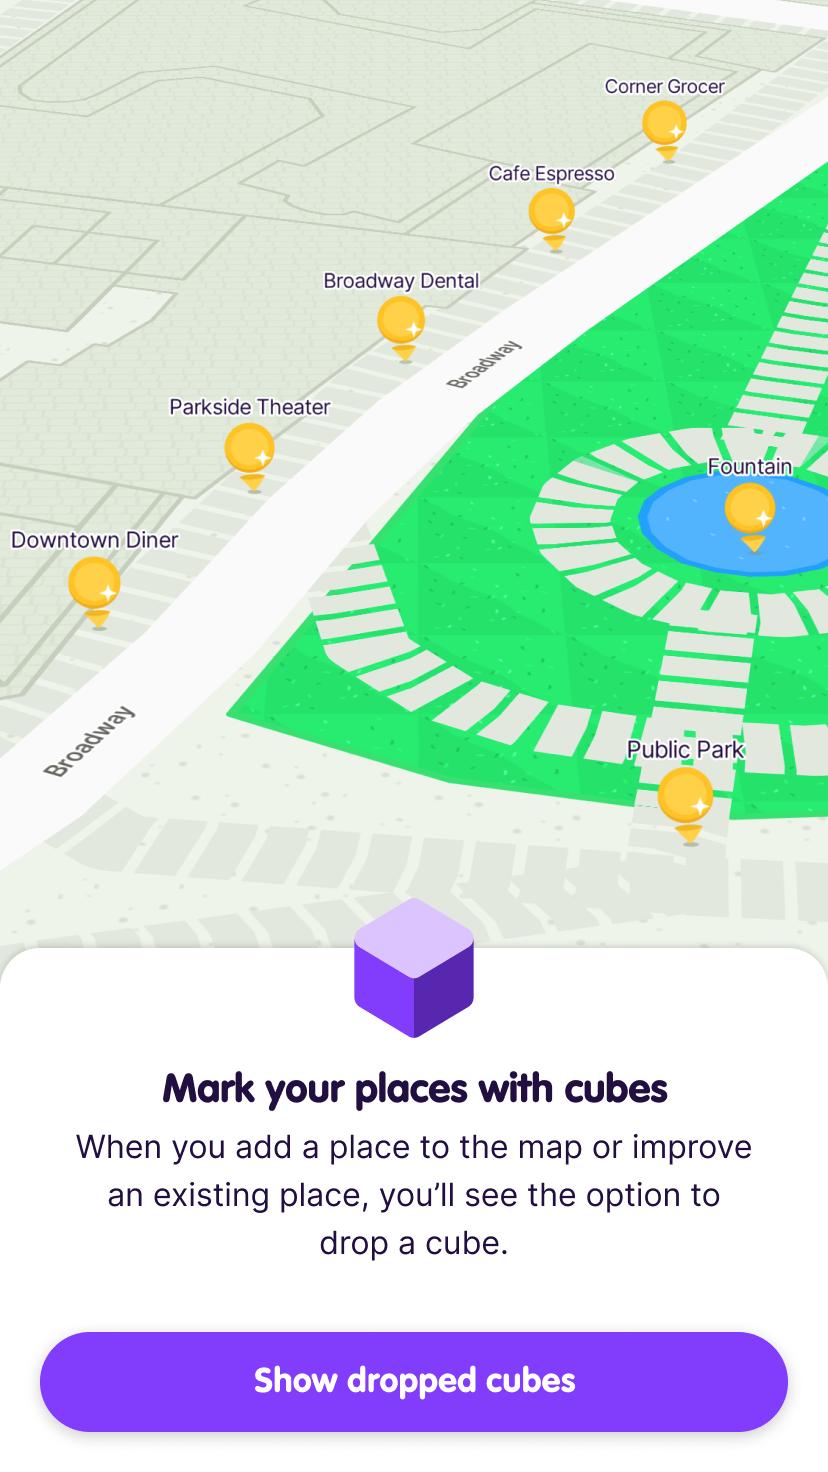 Screenshot from the app intro showing nearby places available for points on the map and prompting the user to tap a button to Show dropped cubes.